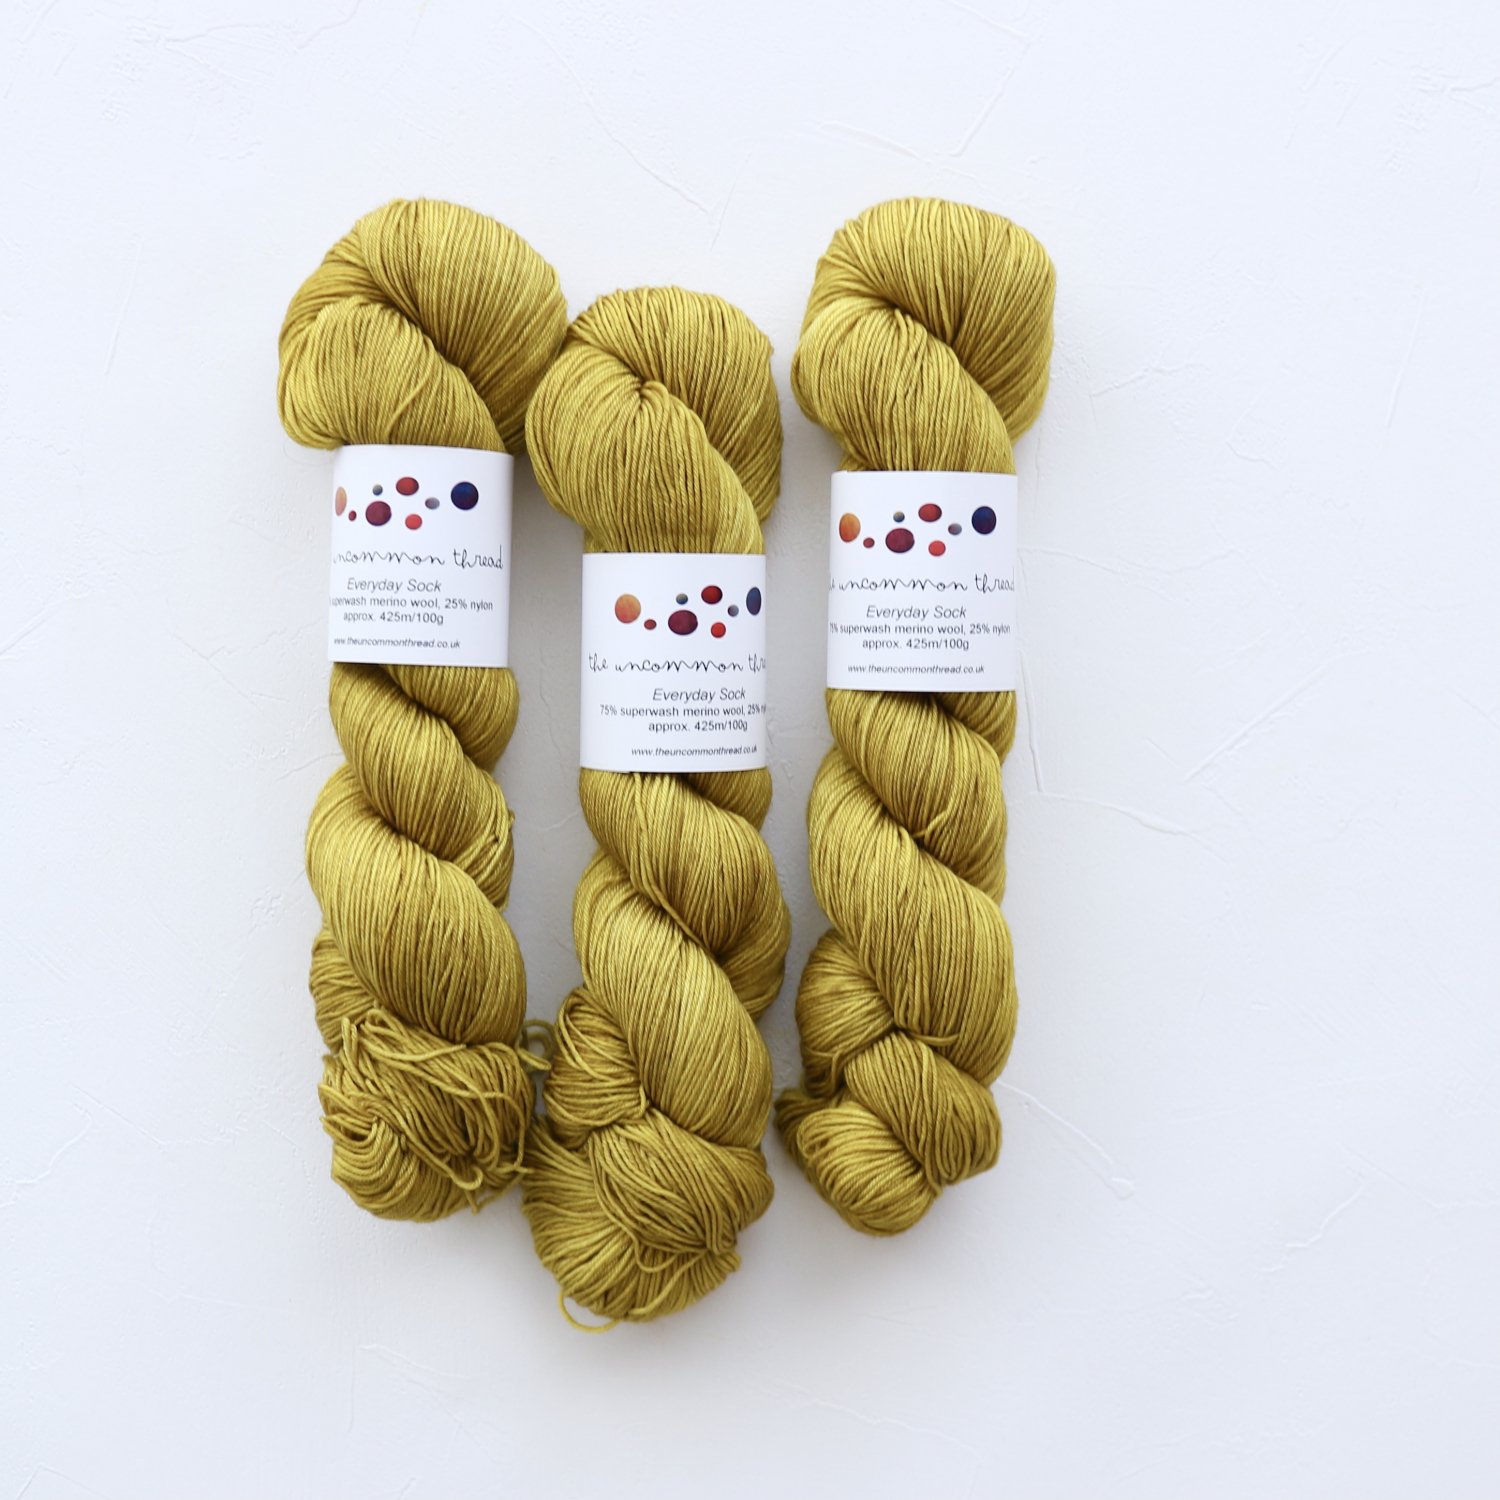 【The Uncommon Thread】<br>Everyday Sock<br>Meadow Grass